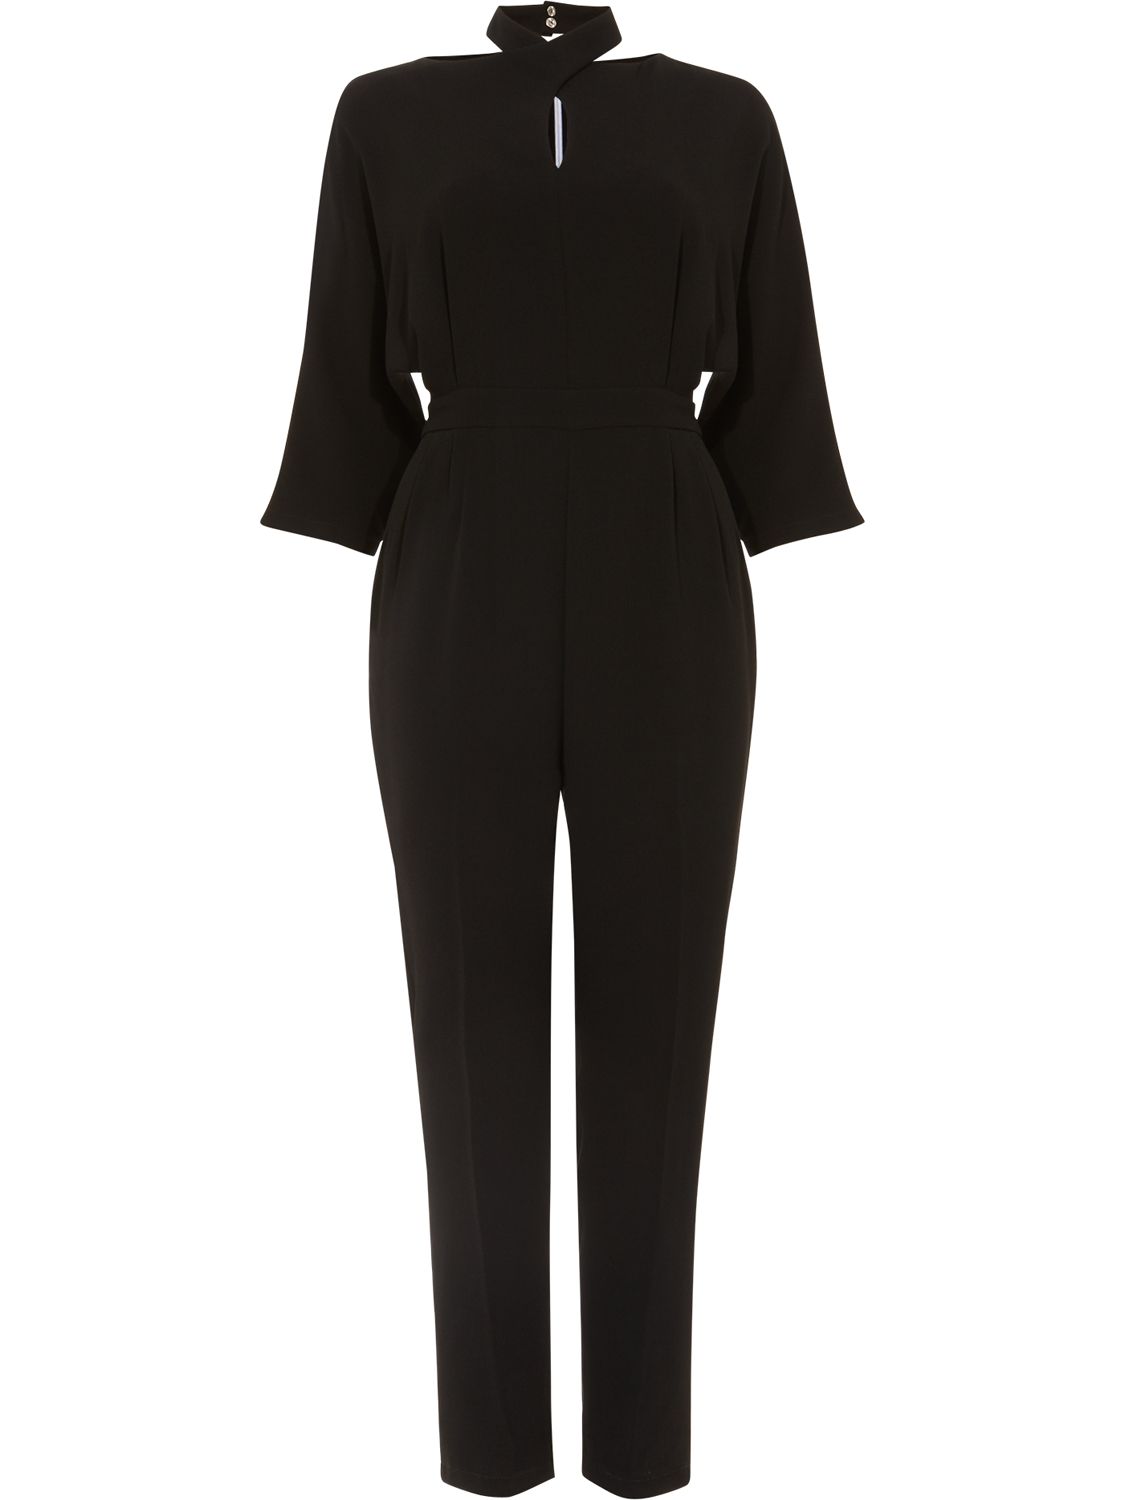 Phase Eight Pantsuit Shop, 47% OFF | www.angloamericancentre.it